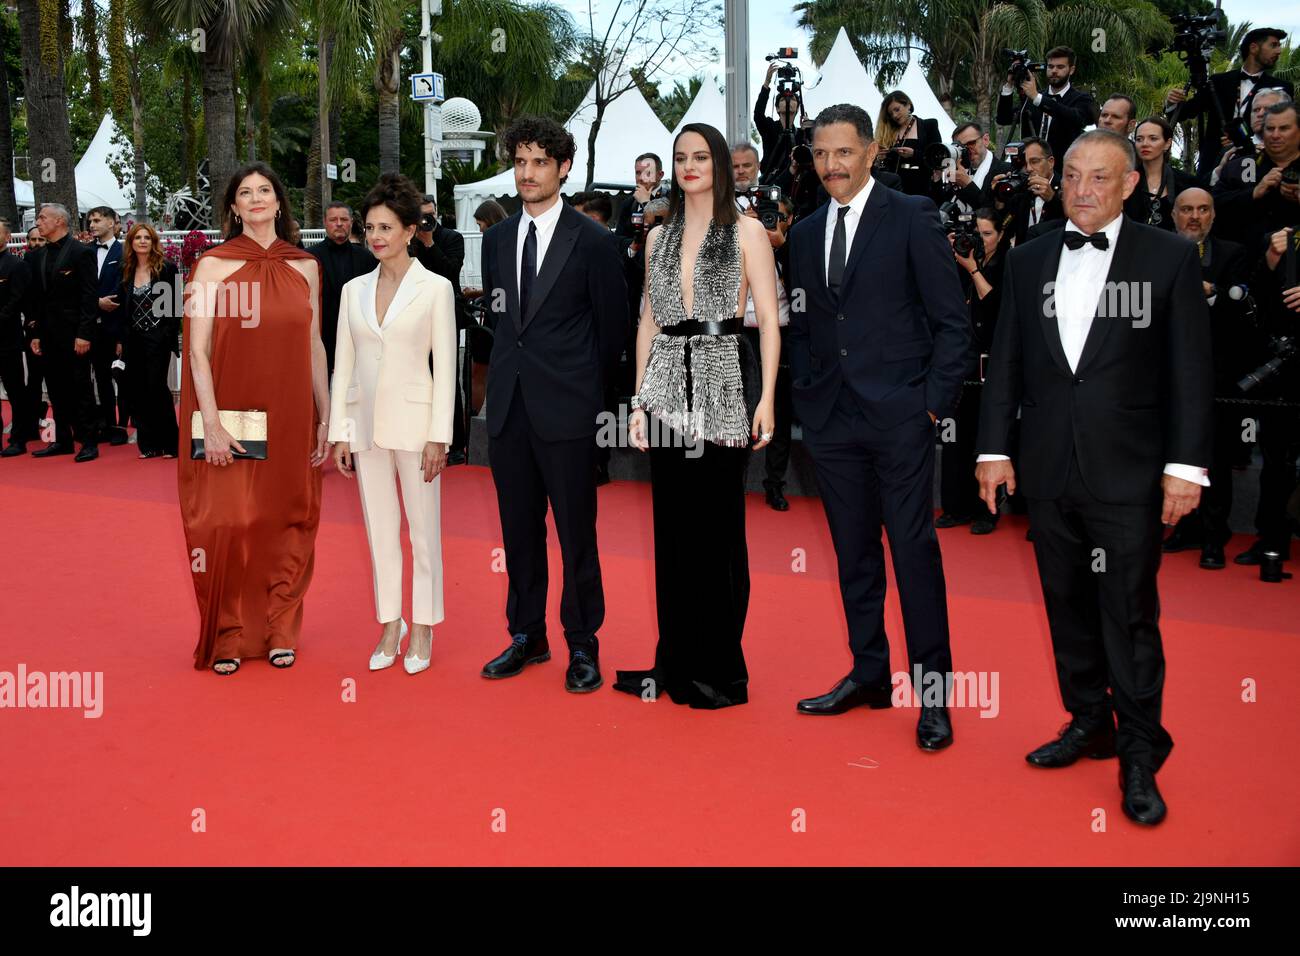 Cannes, France. 24th May, 2022. 75th Cannes Film Festival 2022, Red Carpet 75th Anniversary Celebration Screening Of The Innocent. Pictured Anouk Grinberg, Louis Garrel, Noémie Merlant, Roschdy Zem, Anne-Dominique Toussaint, Jean-Claude Pautot Credit: Independent Photo Agency/Alamy Live News Stock Photo